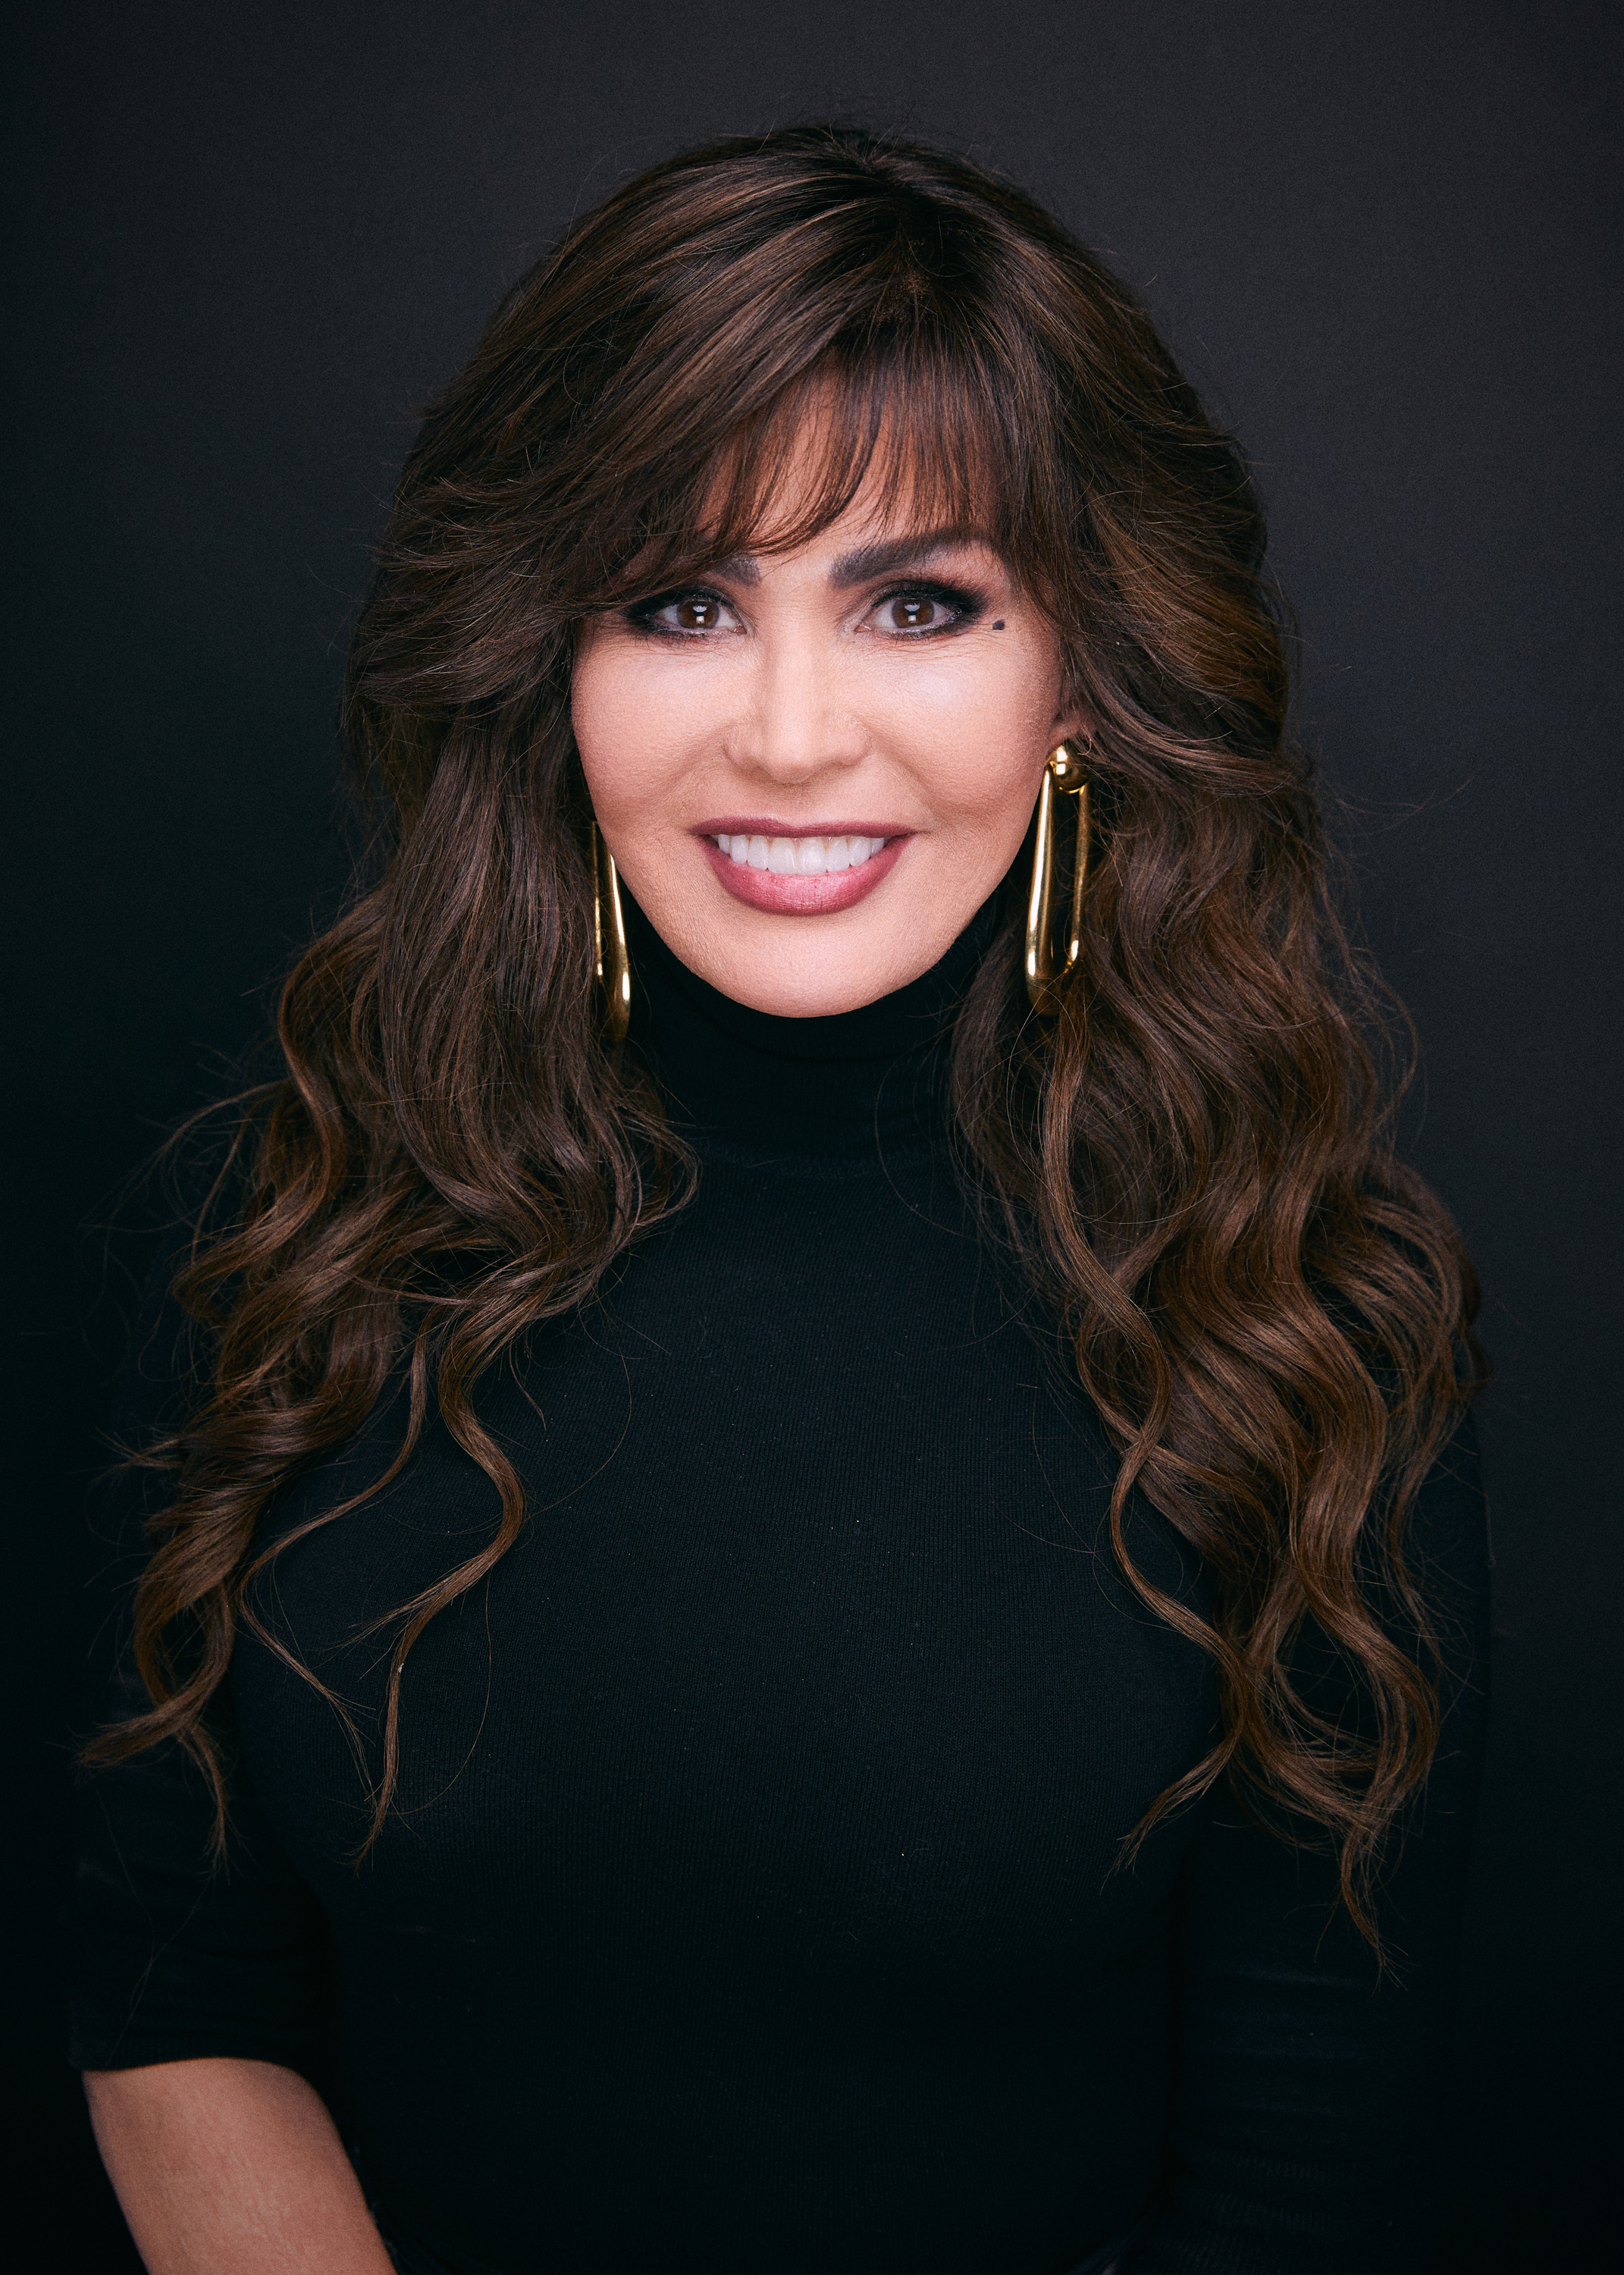 Marie Osmond pictured for a season 3 episode of "The Kelly Clarkson Show" in 2021. | Source: Getty Images